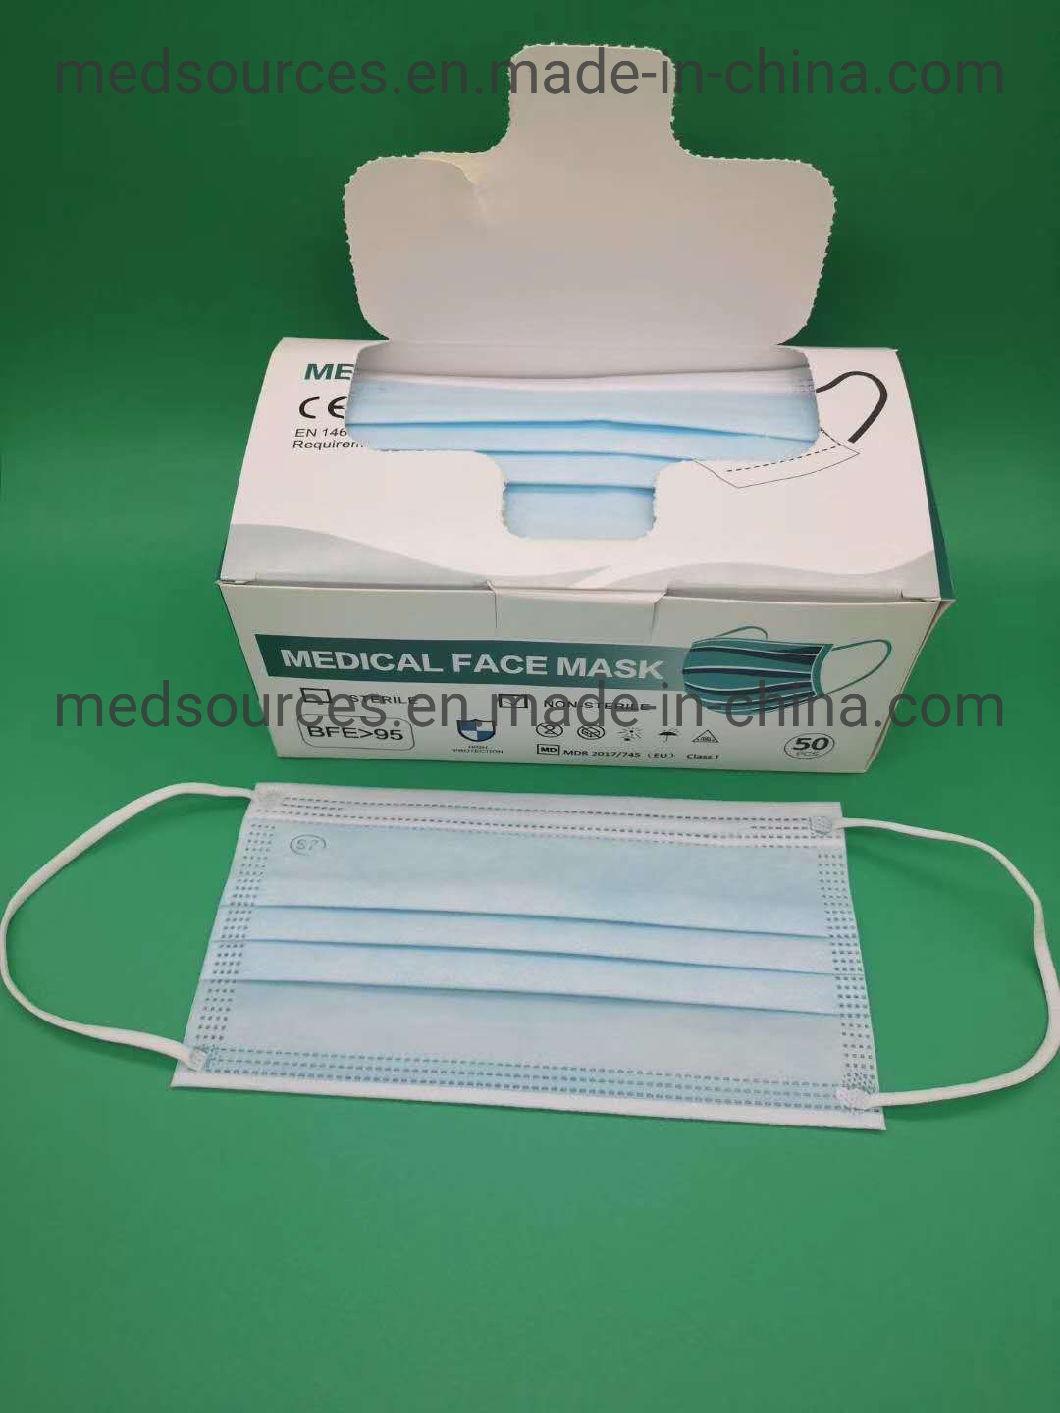 Surgical/Hospital/Medical/Protective/Safety/Nonwoven Activated Carbon Dust/Paper/Dental/SMS/Mouth 3ply Disposable Face Mask with Elastic Ear-Loops/Tie-on